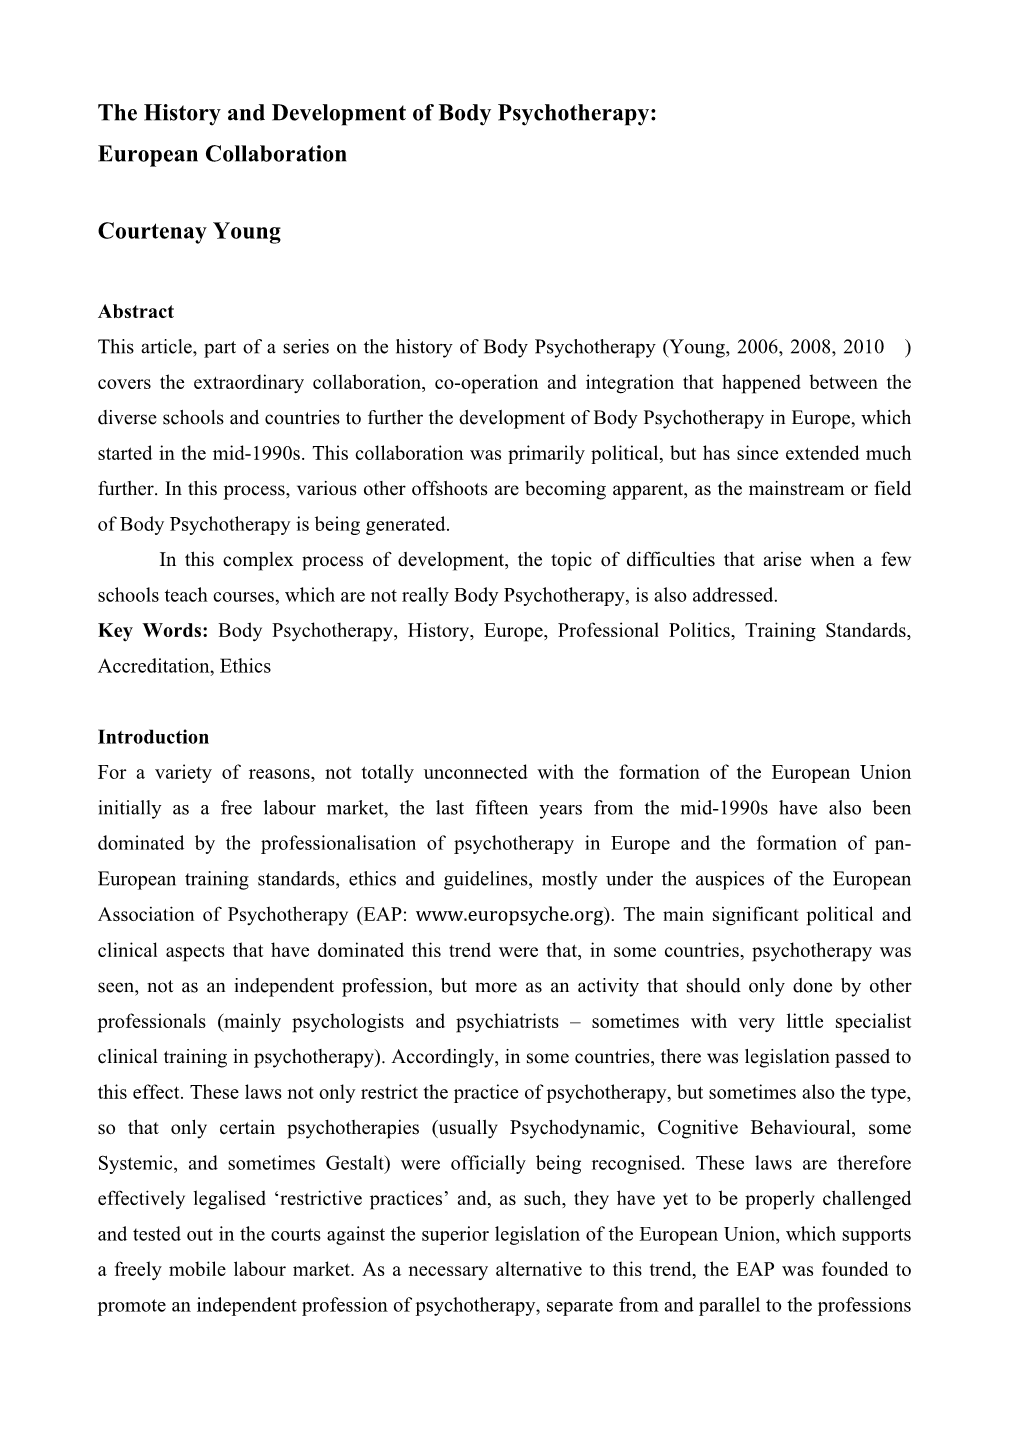 The History and Development of Body Psychotherapy: European Collaboration Courtenay Young